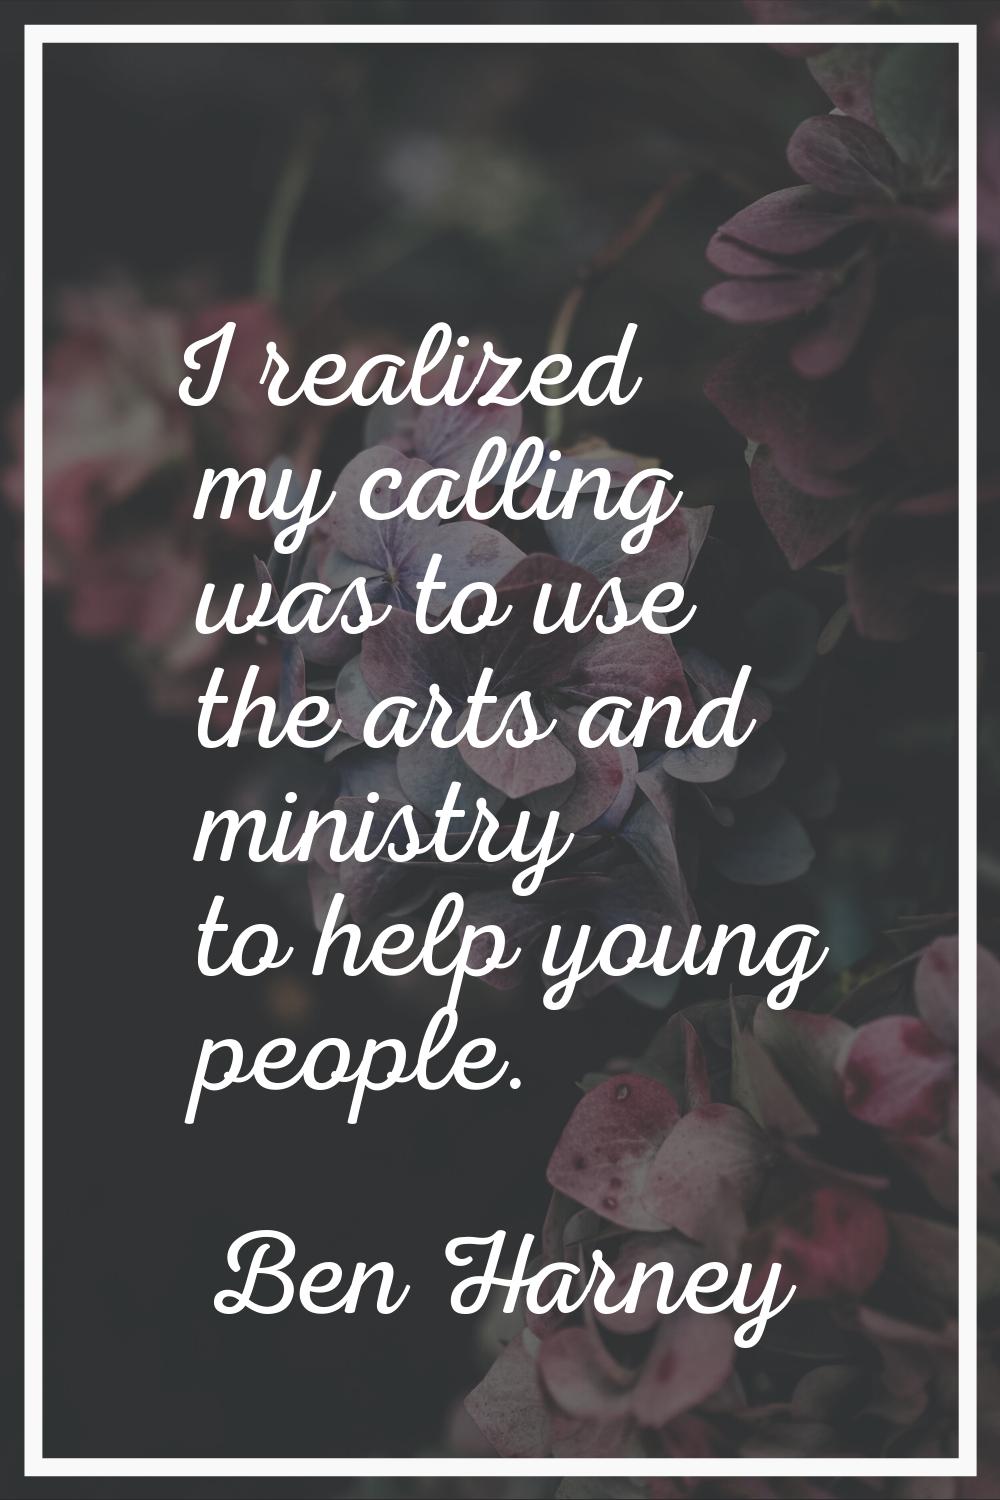 I realized my calling was to use the arts and ministry to help young people.